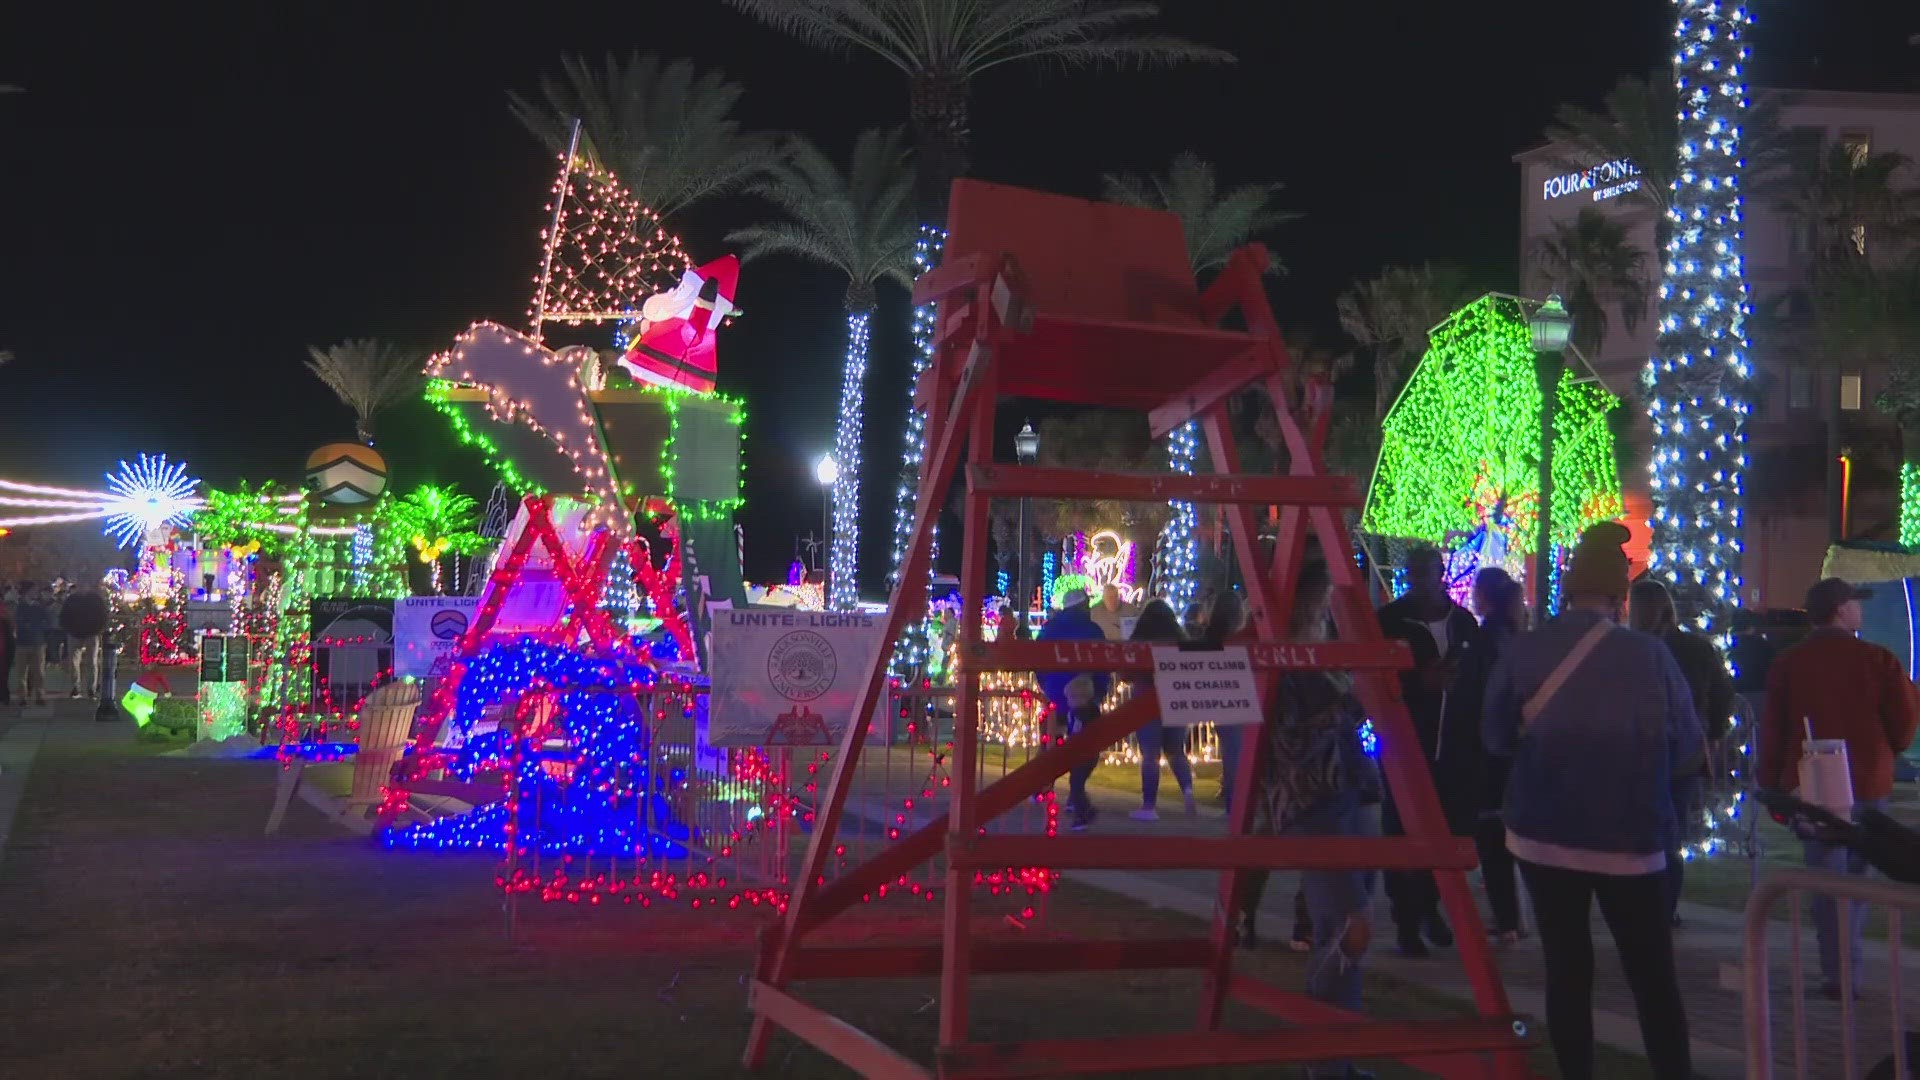 The colorful lifeguard chairs will fill Latham Plaza in Jacksonville Beach for the next six weeks. And for the first time this year, also in Downtown Jacksonville.